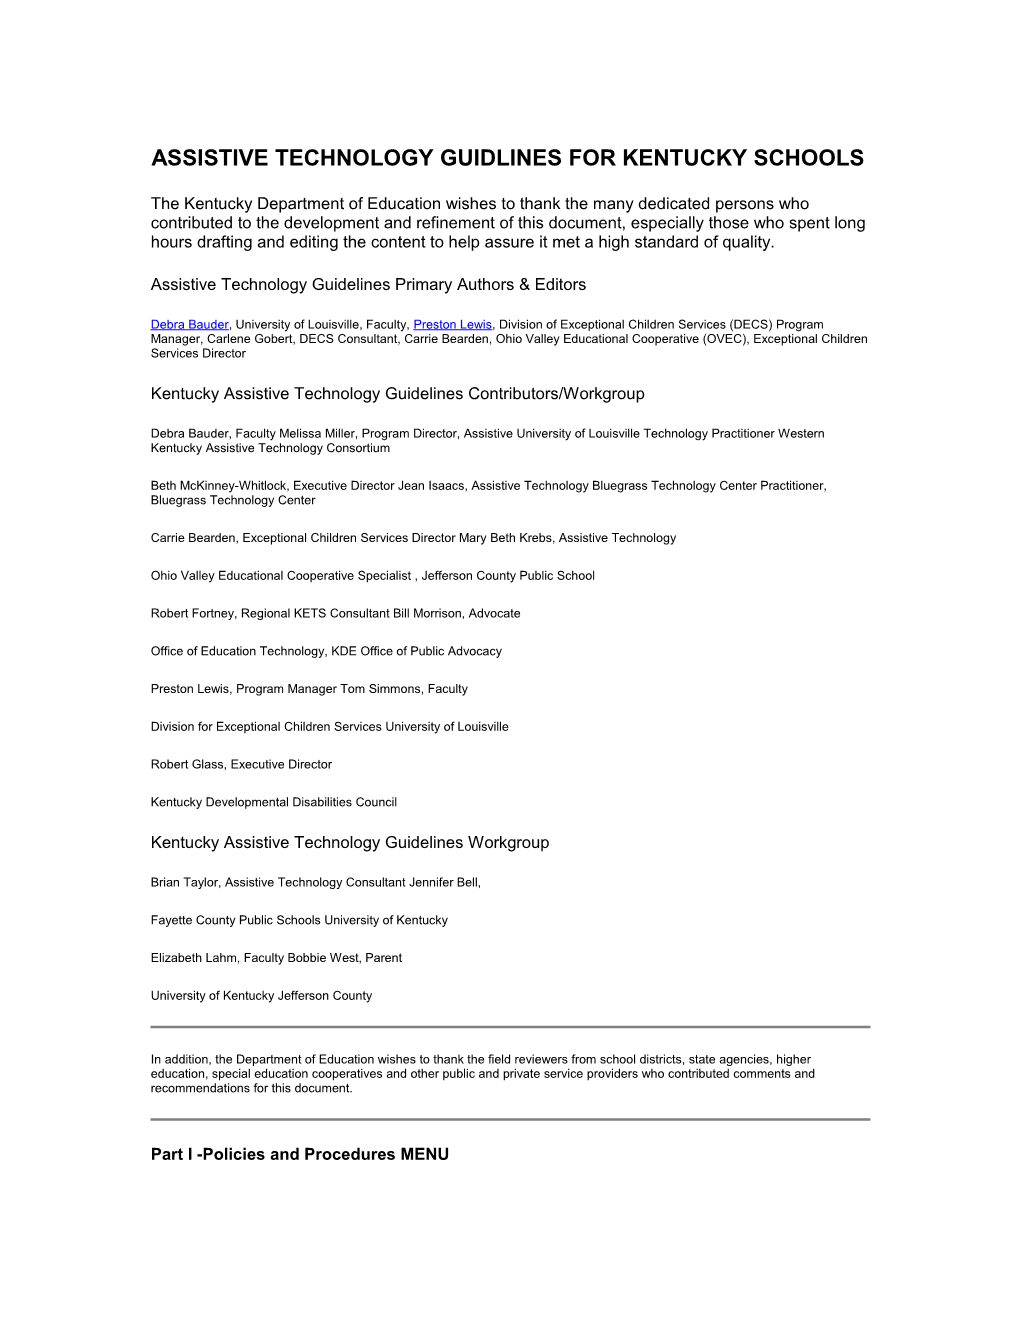 Assistive Technology Guidlines for Kentucky Schools